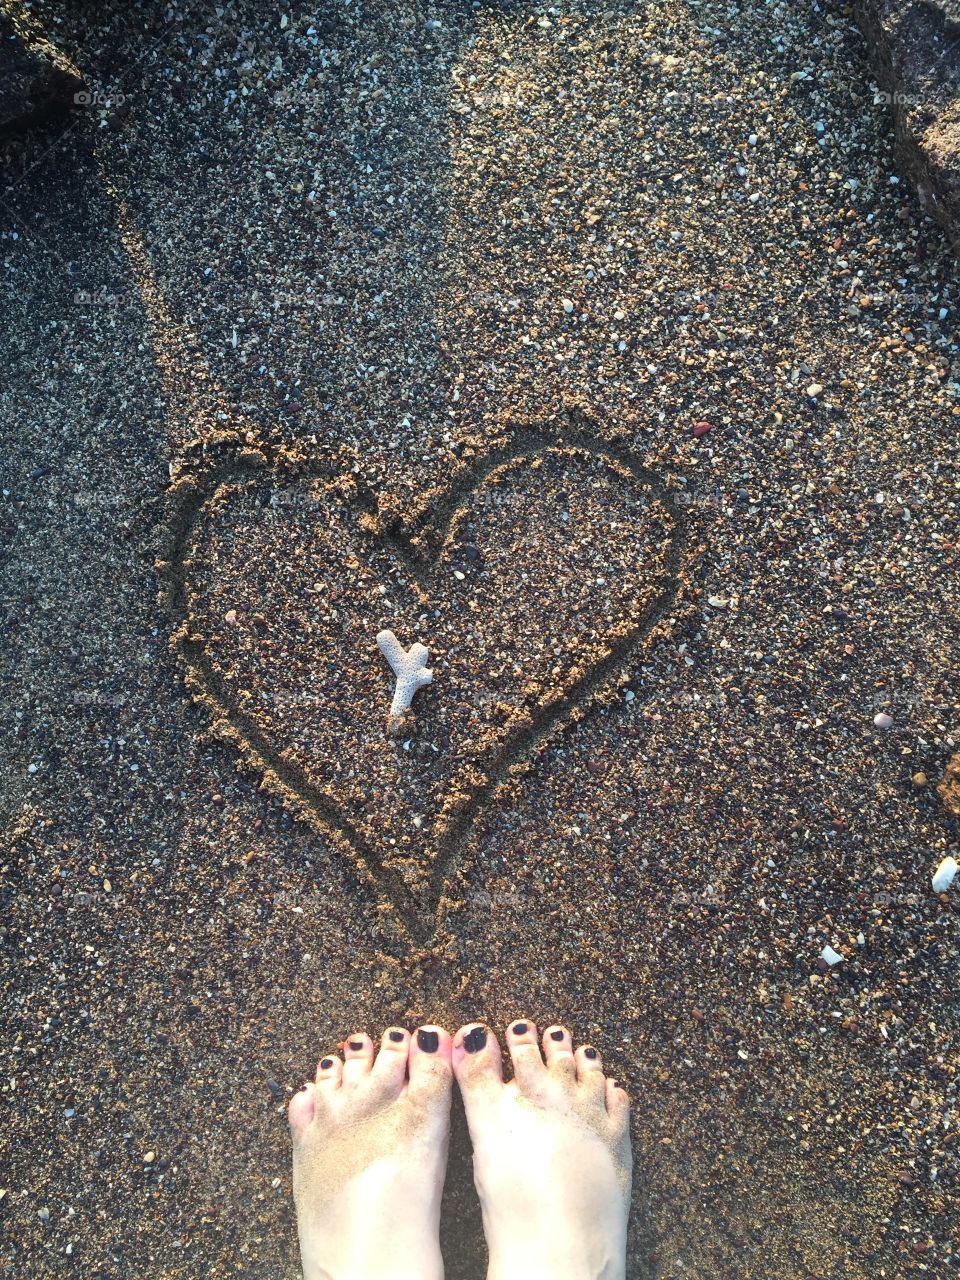 Hearts in sand